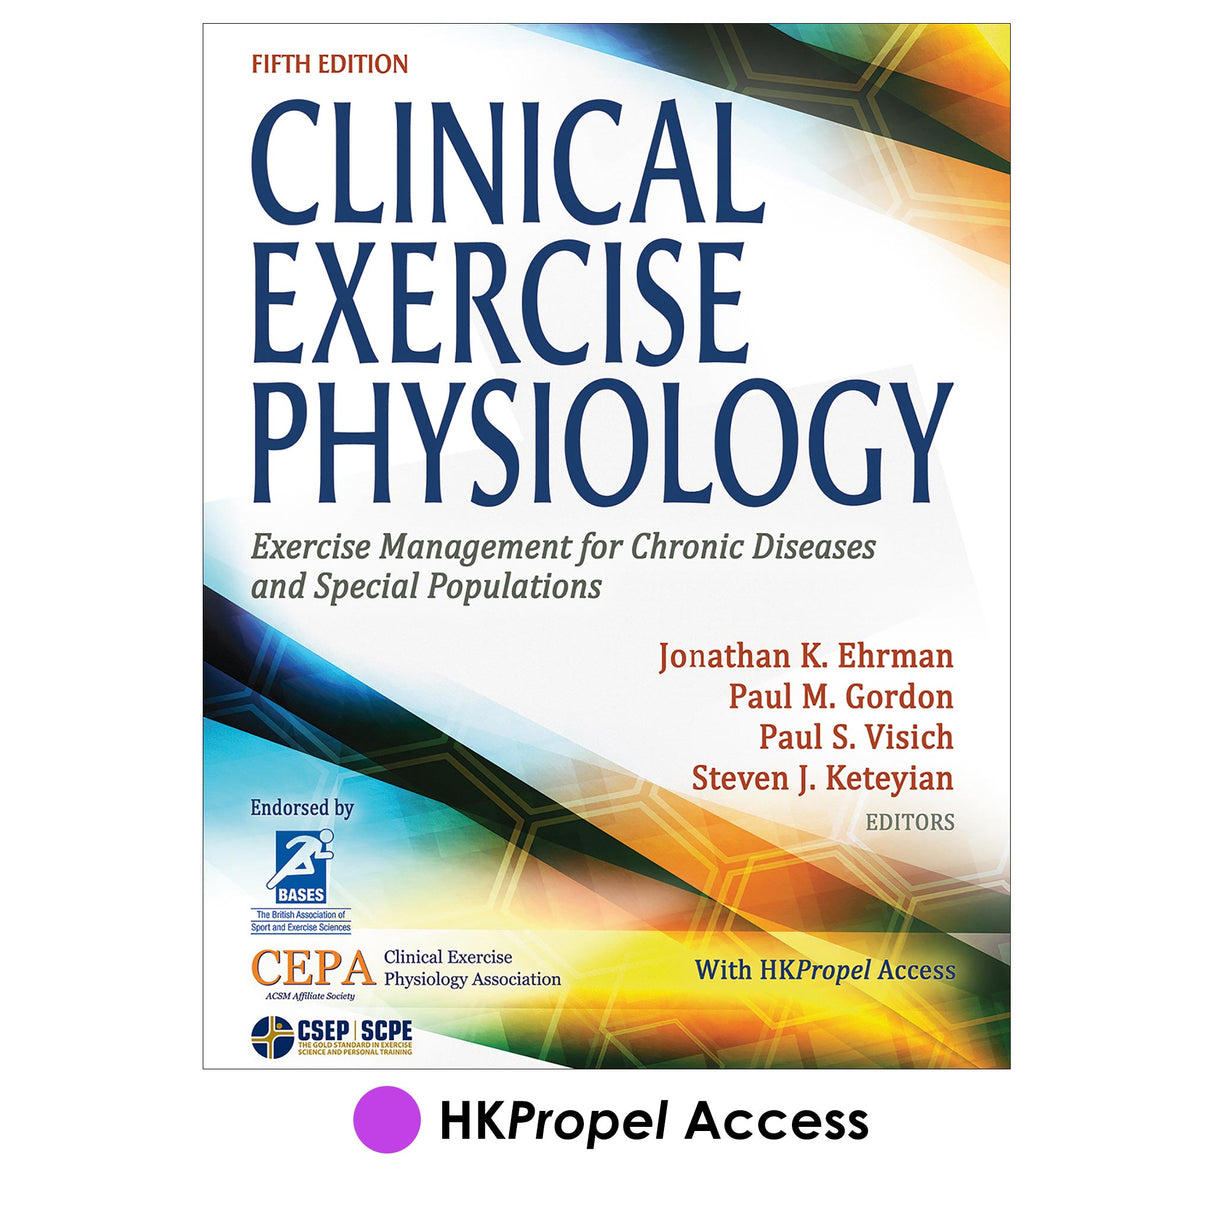 Clinical Exercise Physiology 5th Edition HKPropel Access